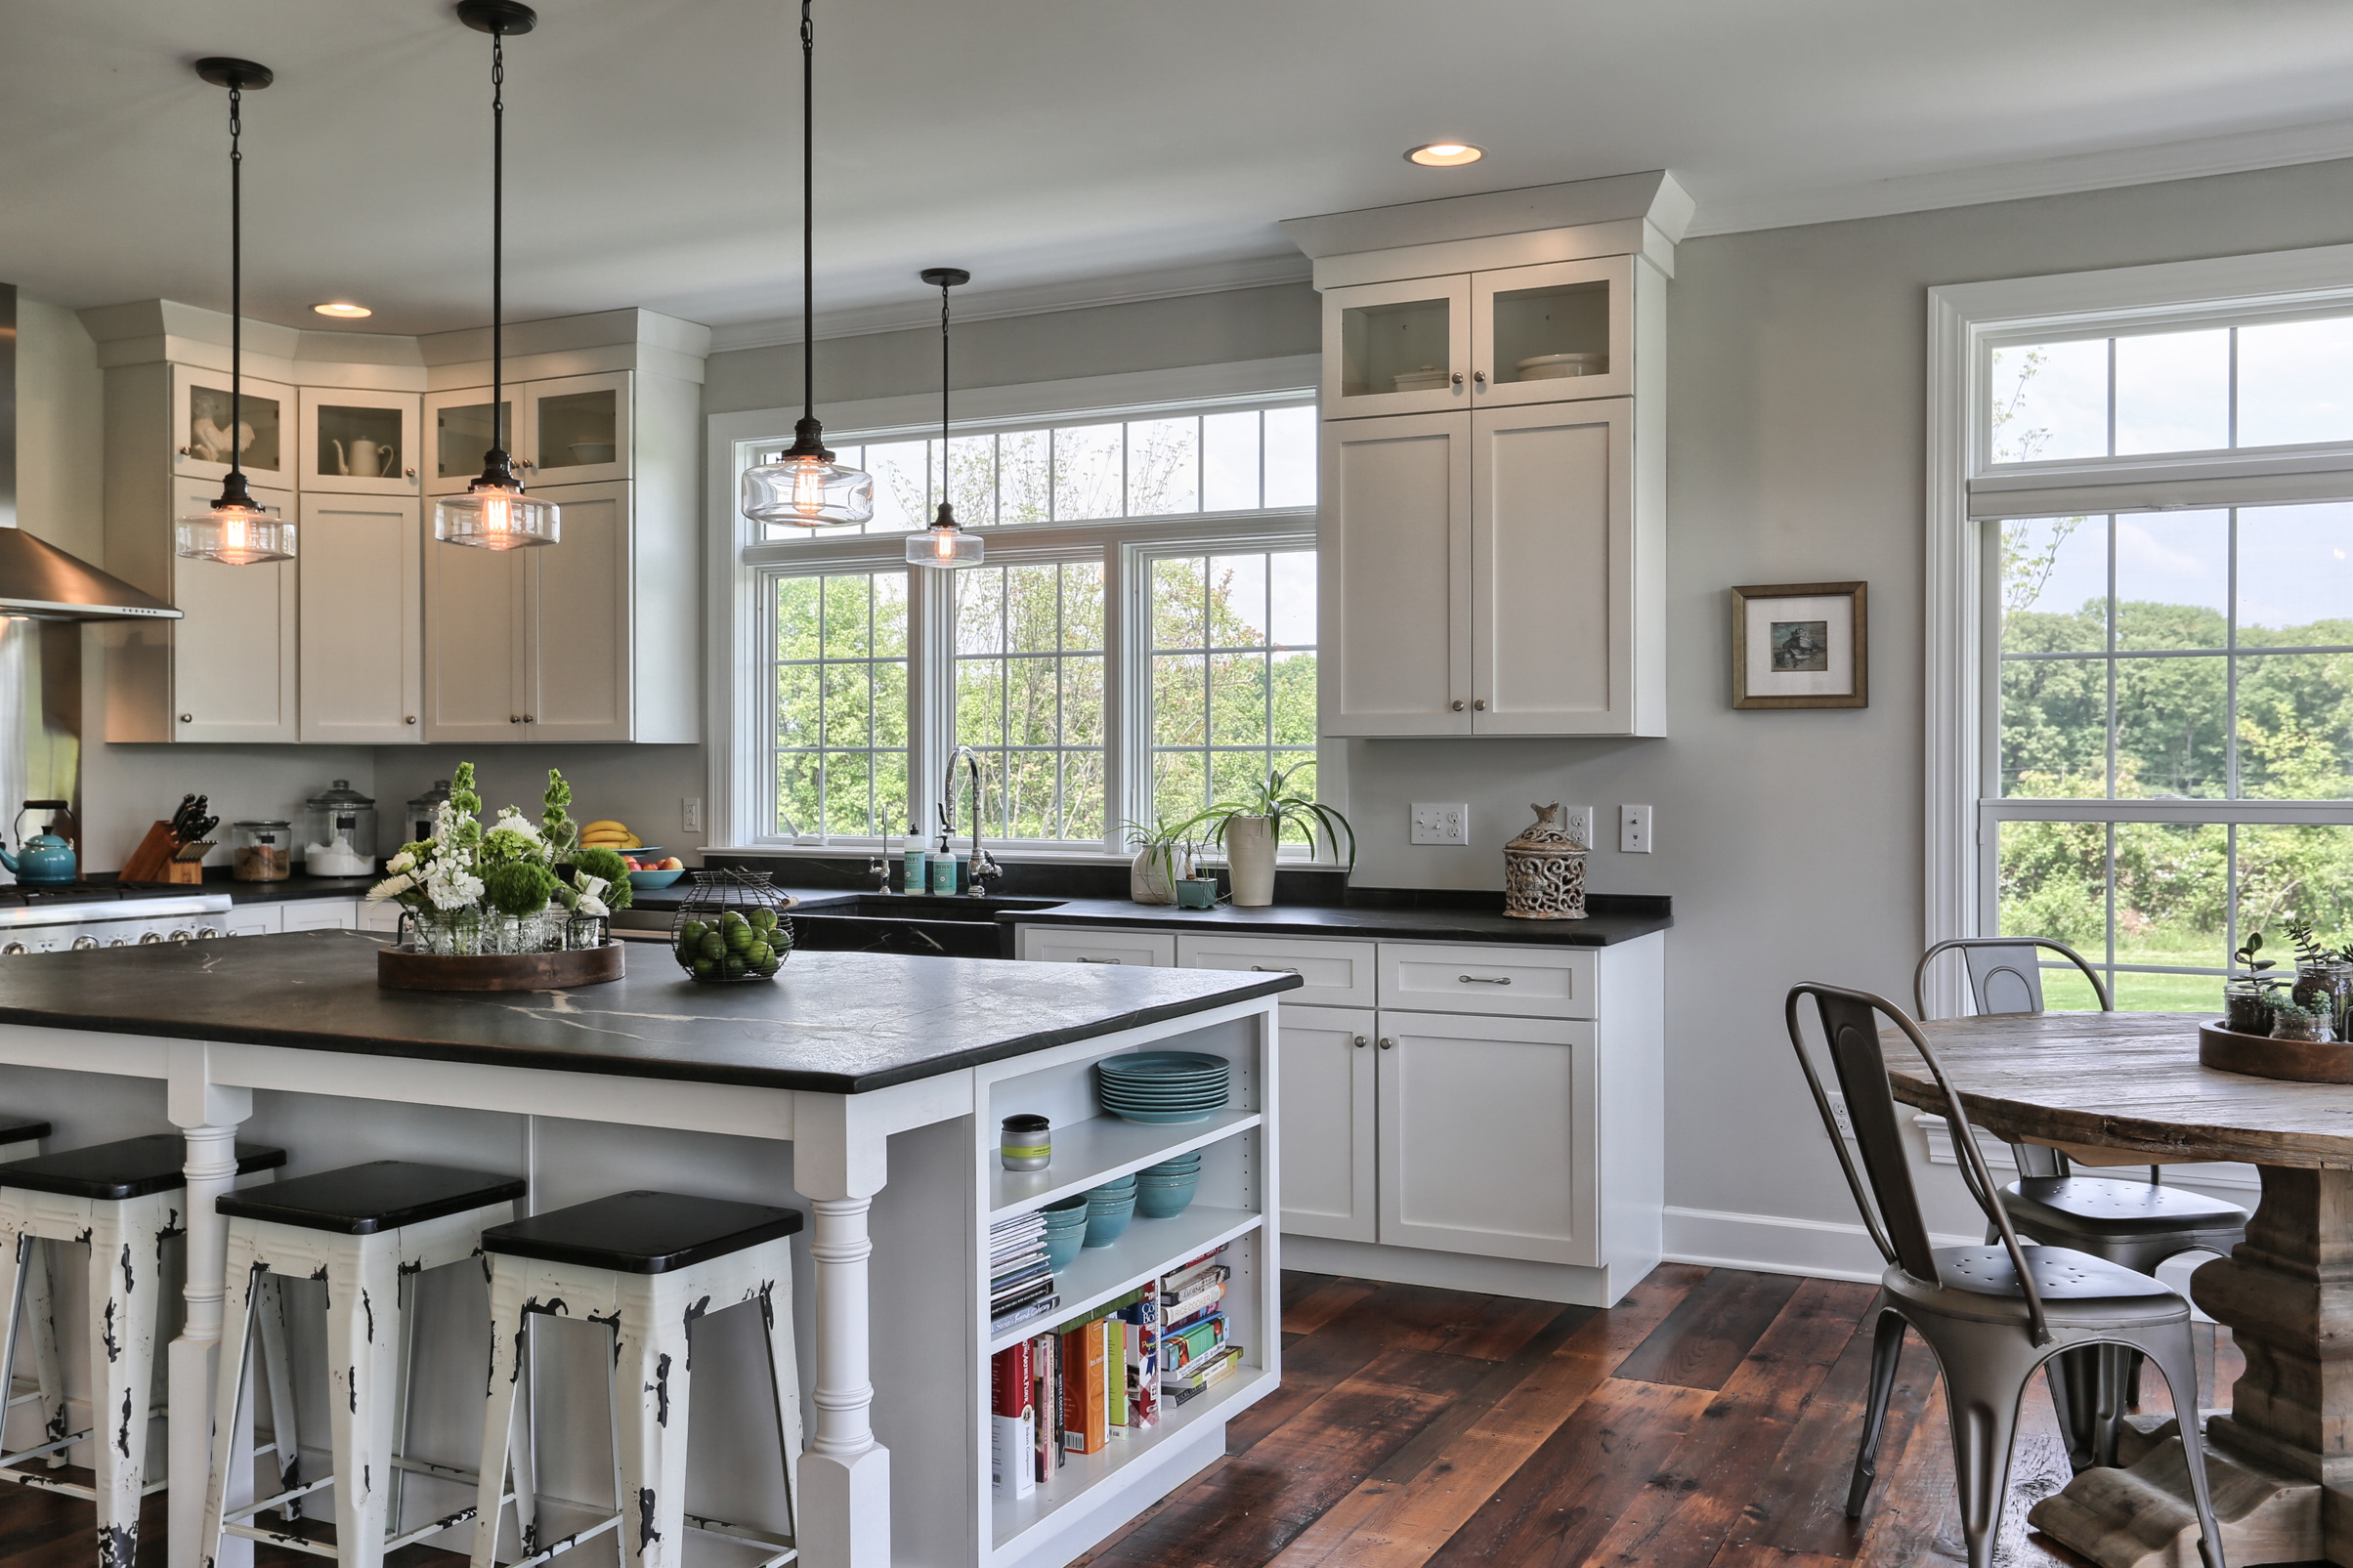  Project Spotlight: A Country Farmhouse Kitchen